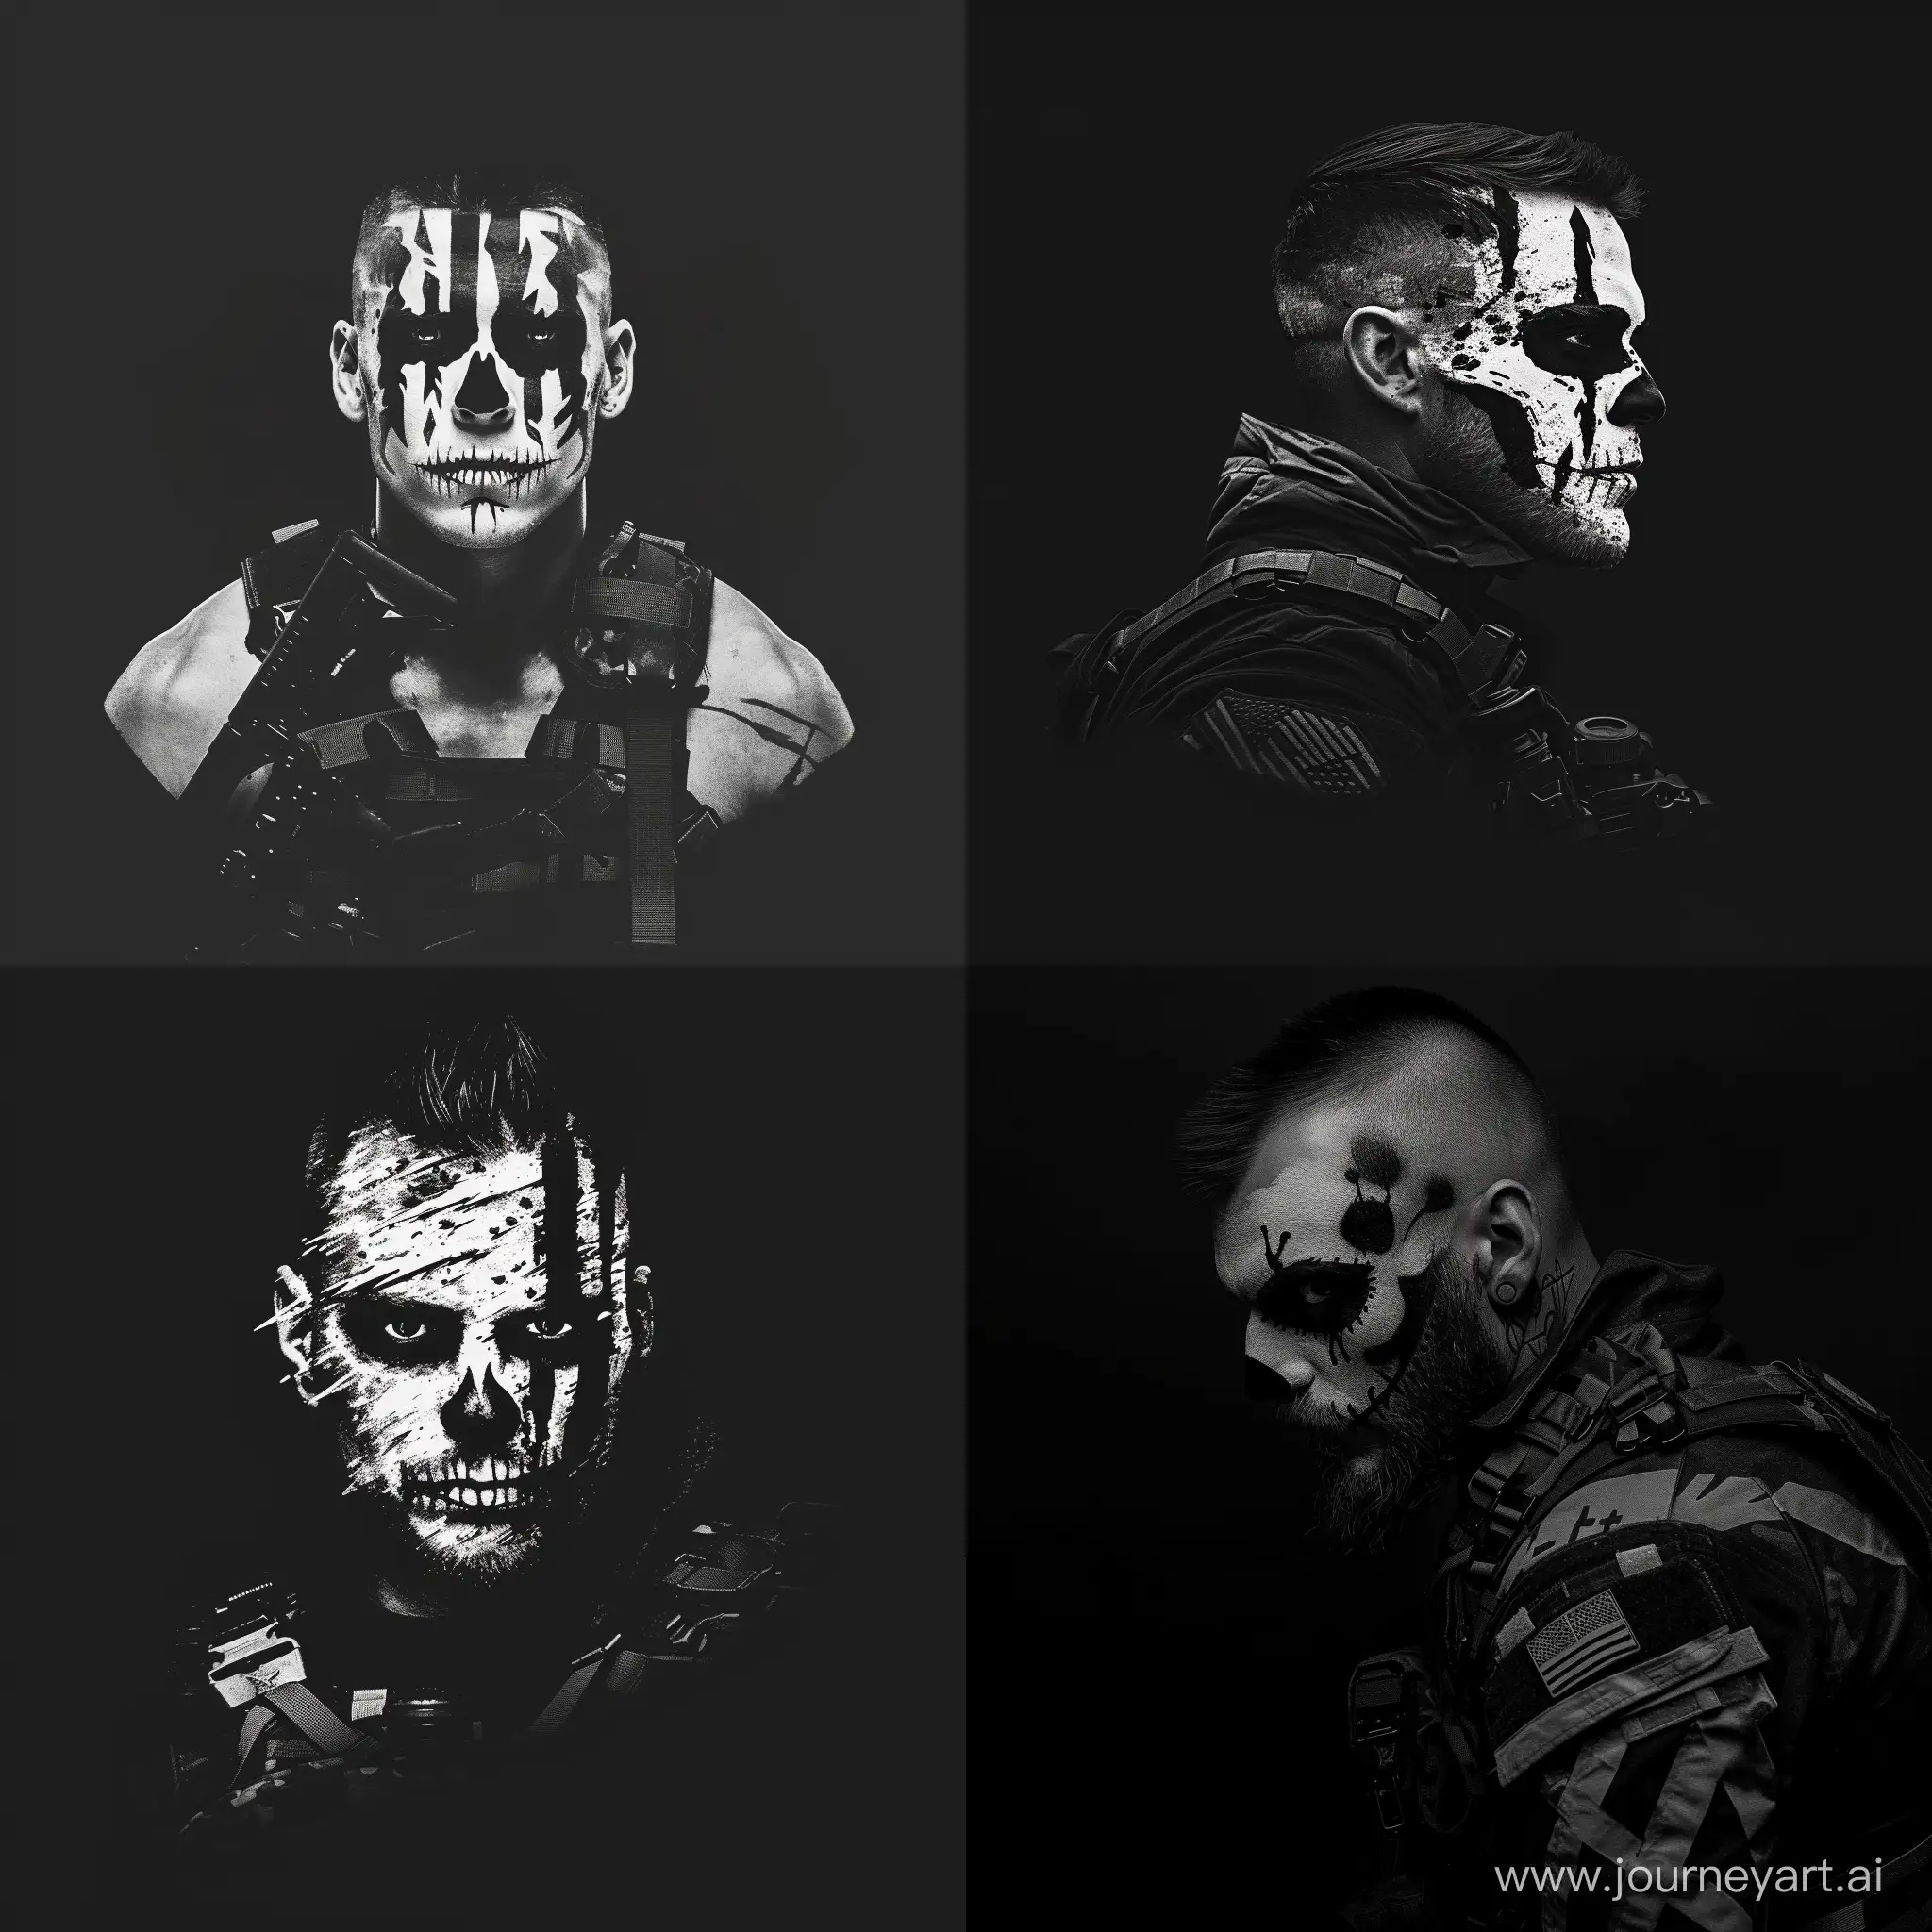 Minimalistic-Skull-War-Paint-Man-with-Military-Equipment-in-Black-and-White